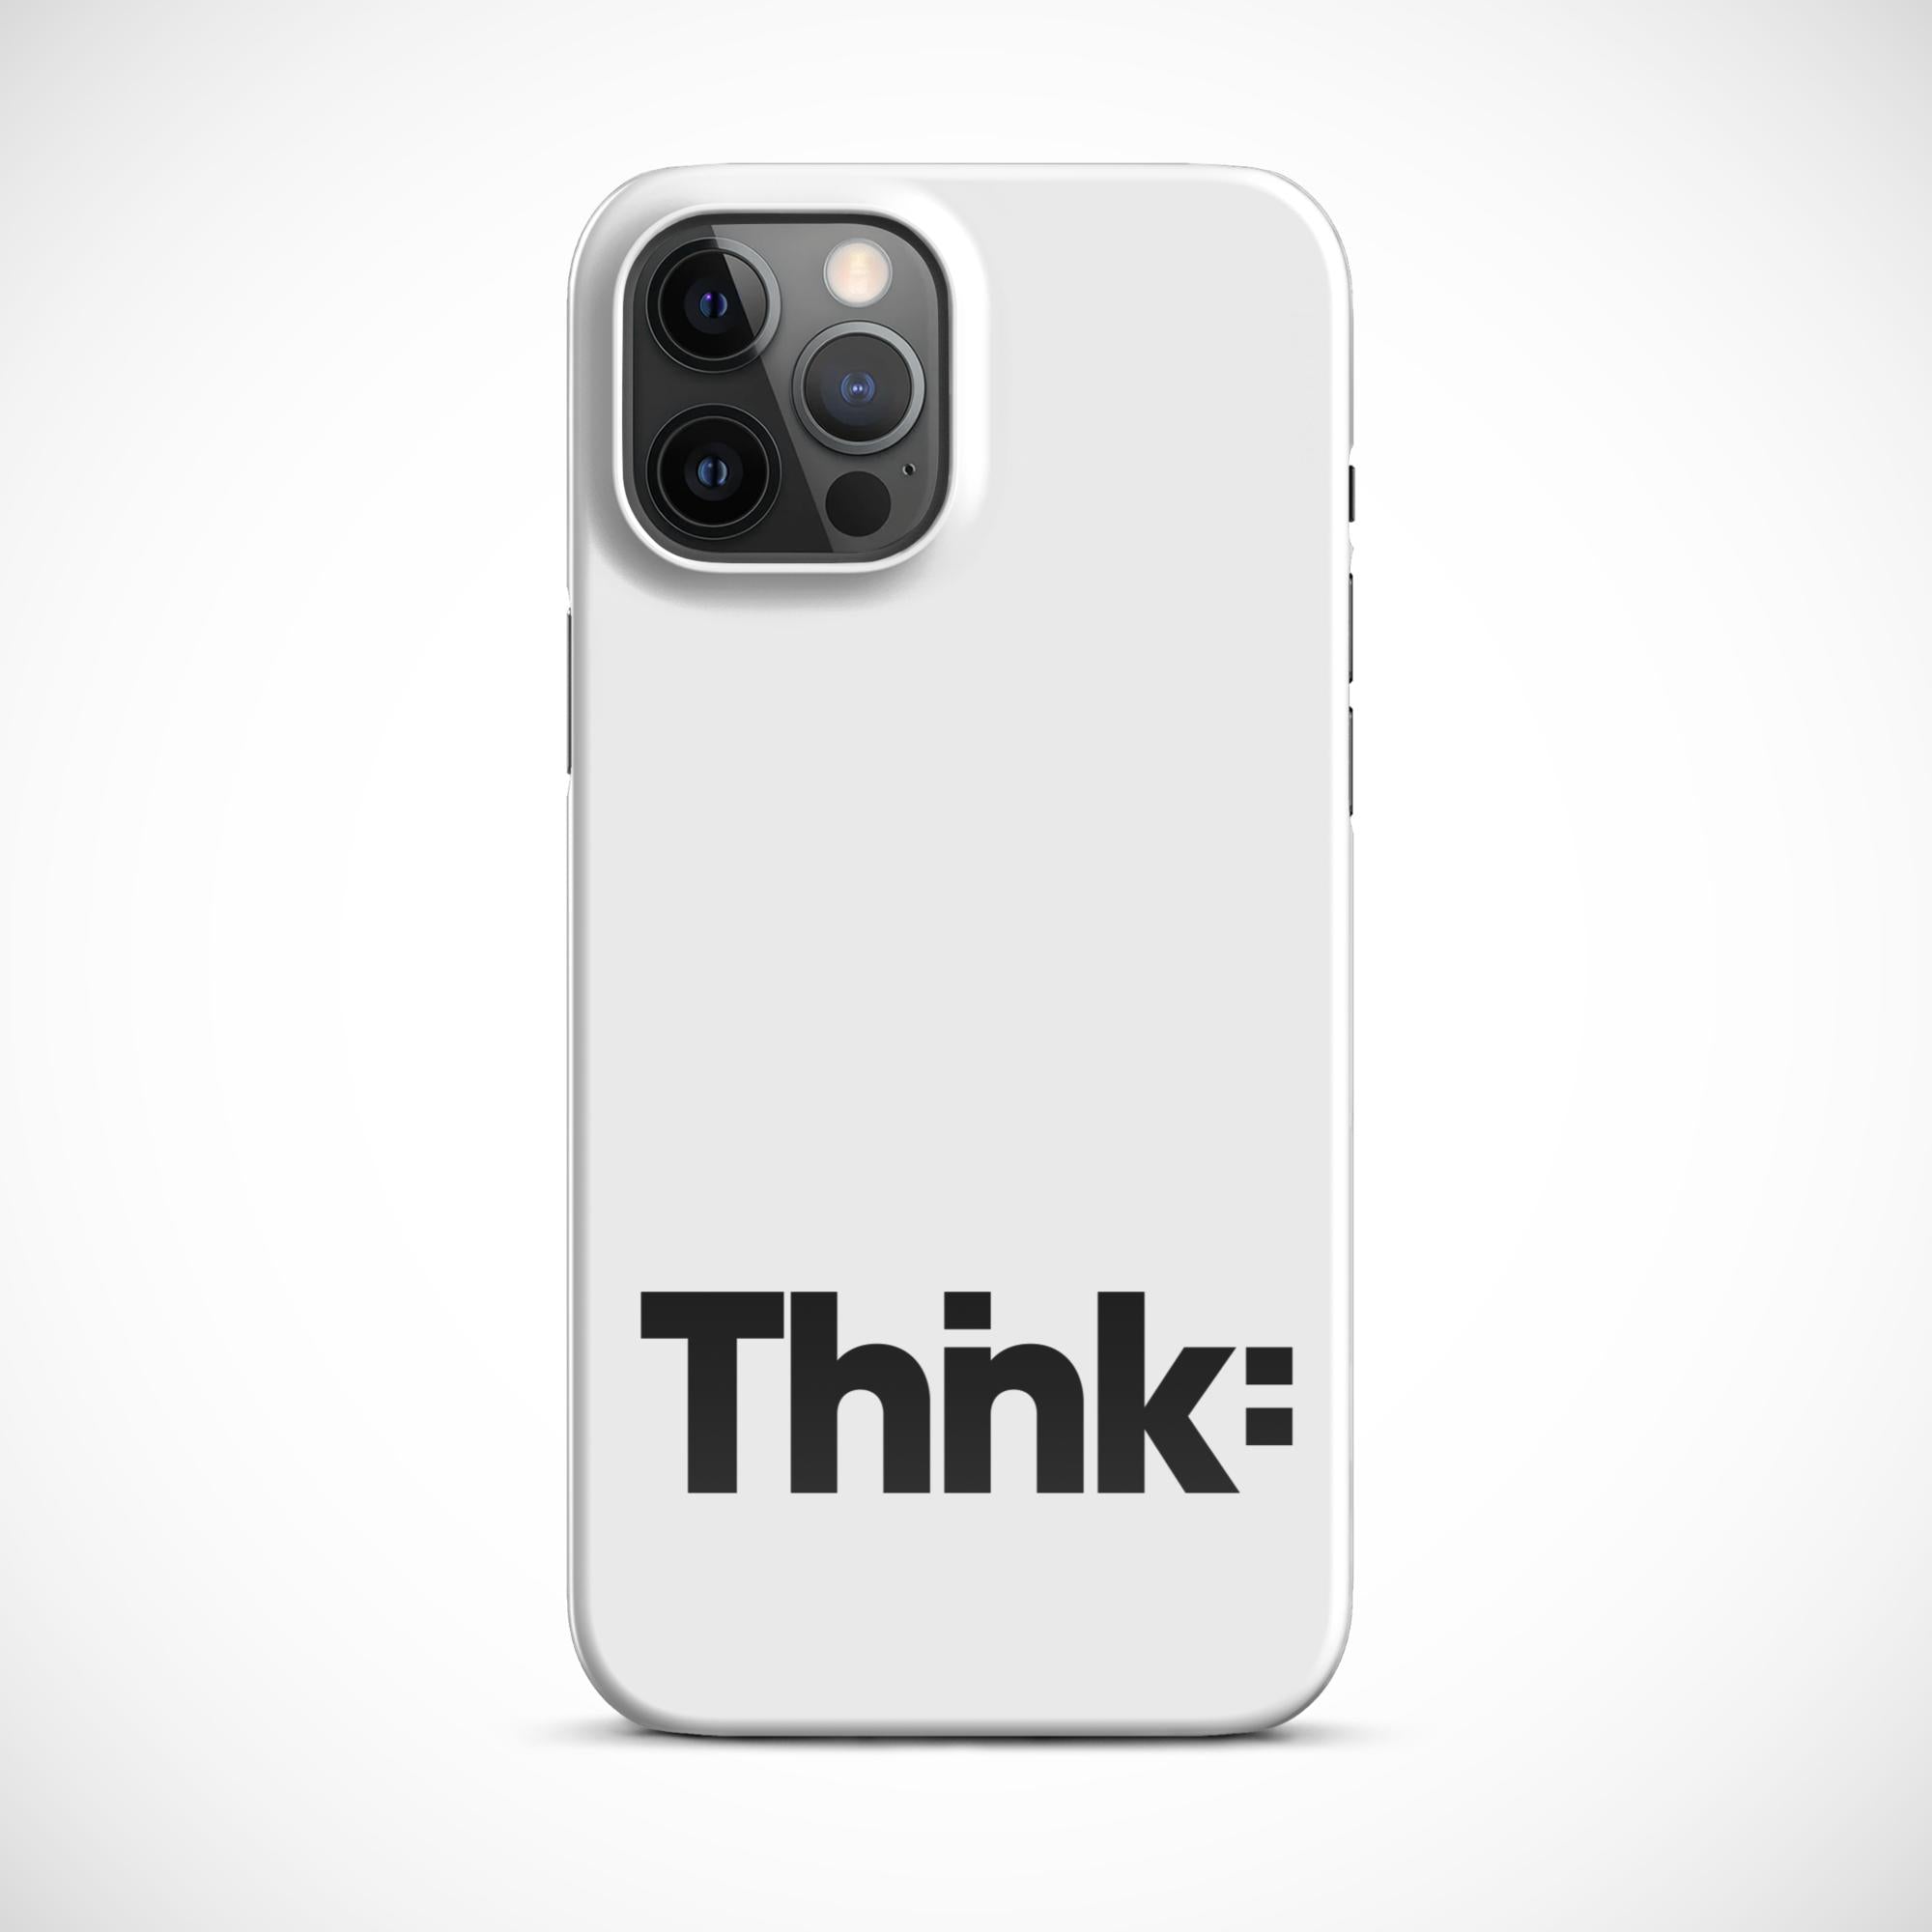 Thnk Case for iPhone®